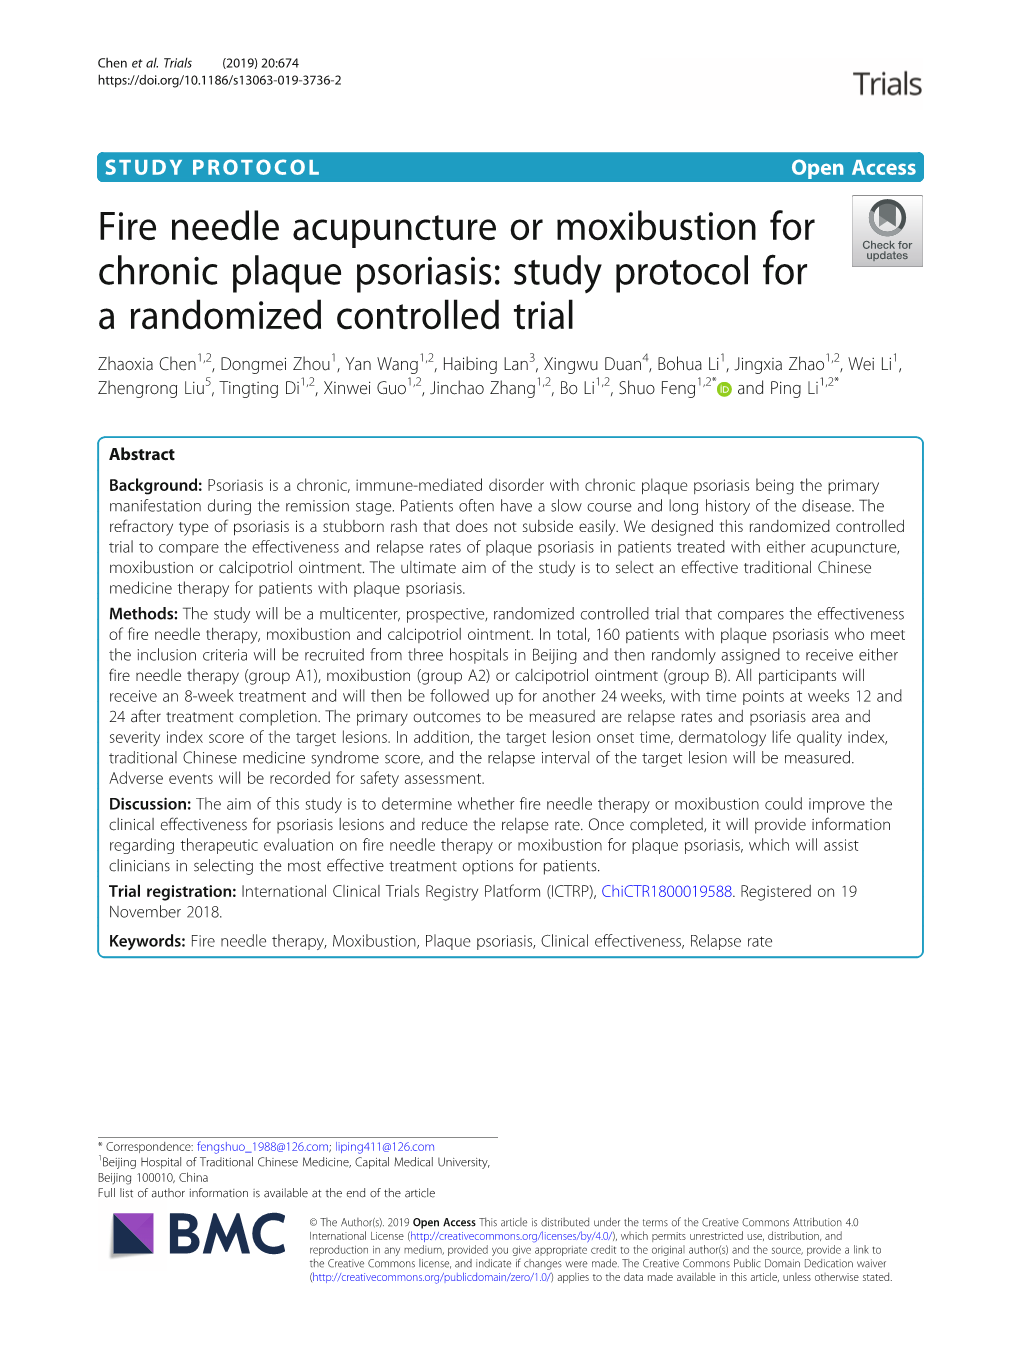 Fire Needle Acupuncture Or Moxibustion For